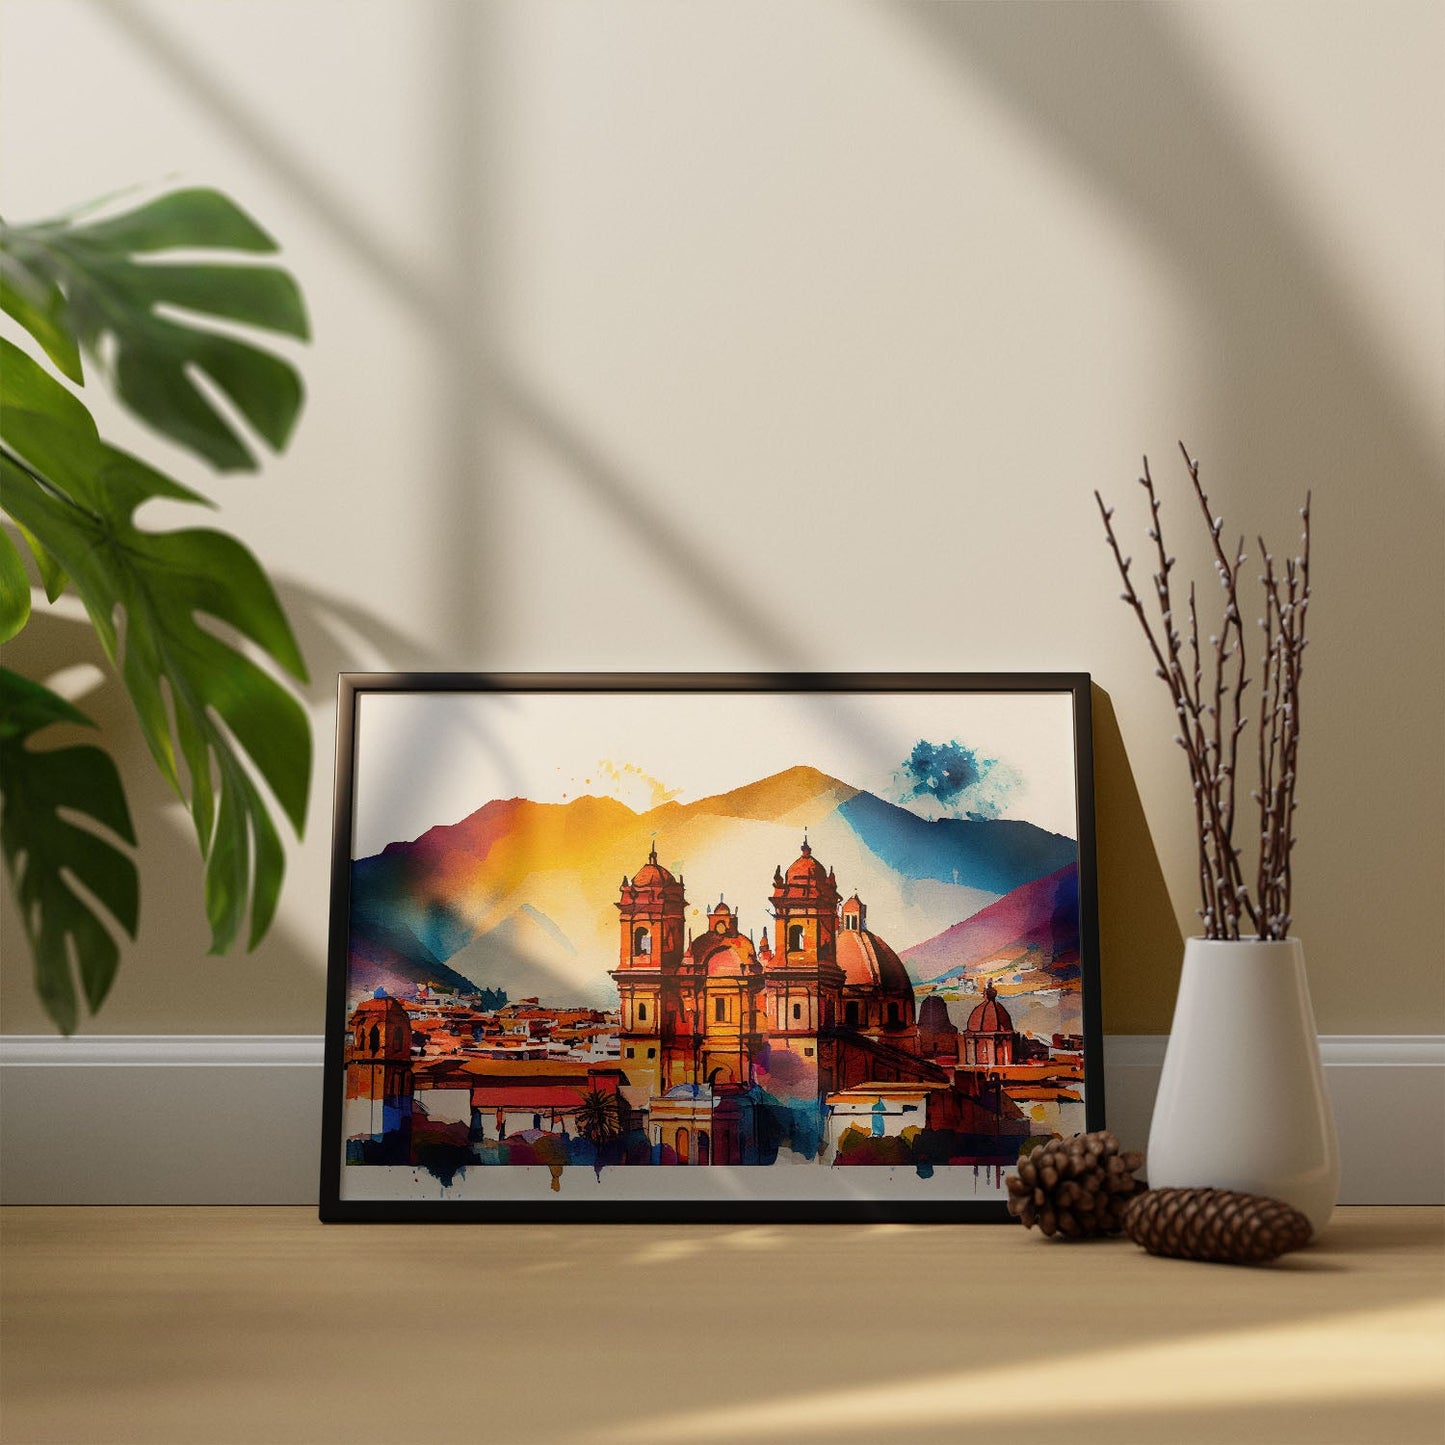 Nacnic watercolor of a skyline of the city of Cusco. Aesthetic Wall Art Prints for Bedroom or Living Room Design.-Artwork-Nacnic-A4-Sin Marco-Nacnic Estudio SL